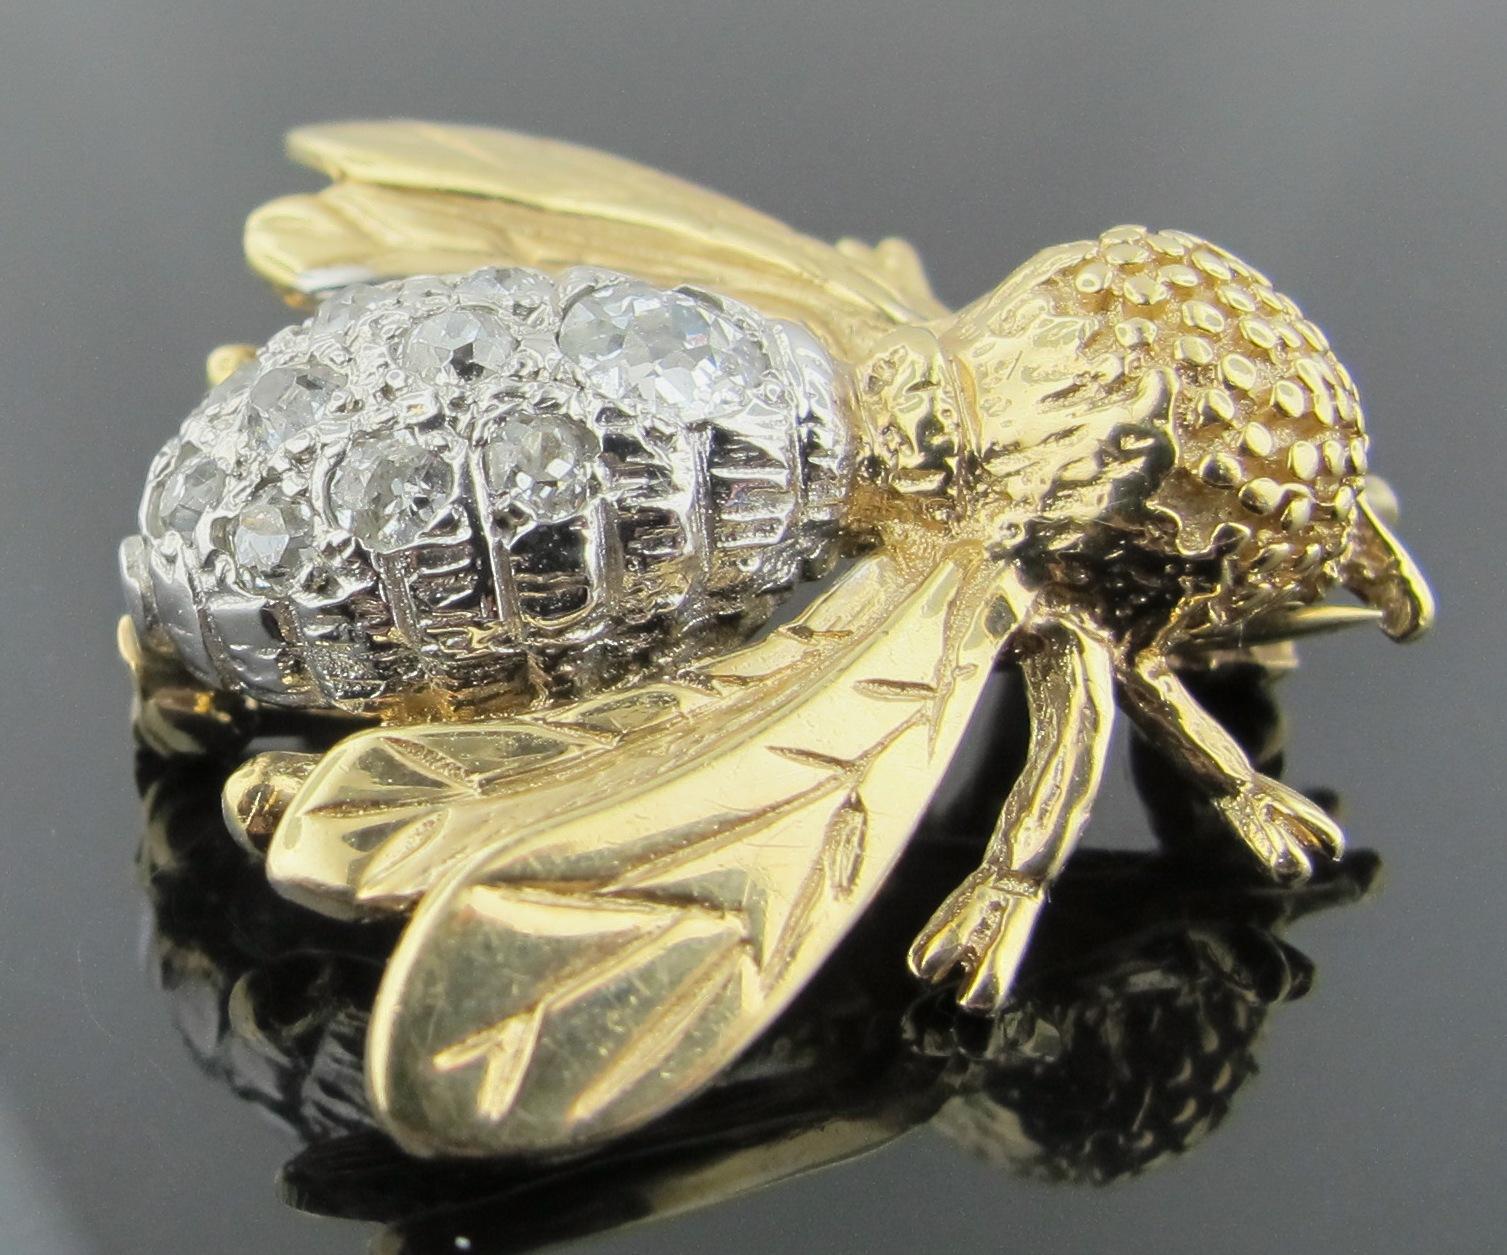 14 karat yellow gold Vintage BEE pin with 12 Old European Cut diamonds weighing a total of 0.50 carats.  Color is H, Clarity is VS